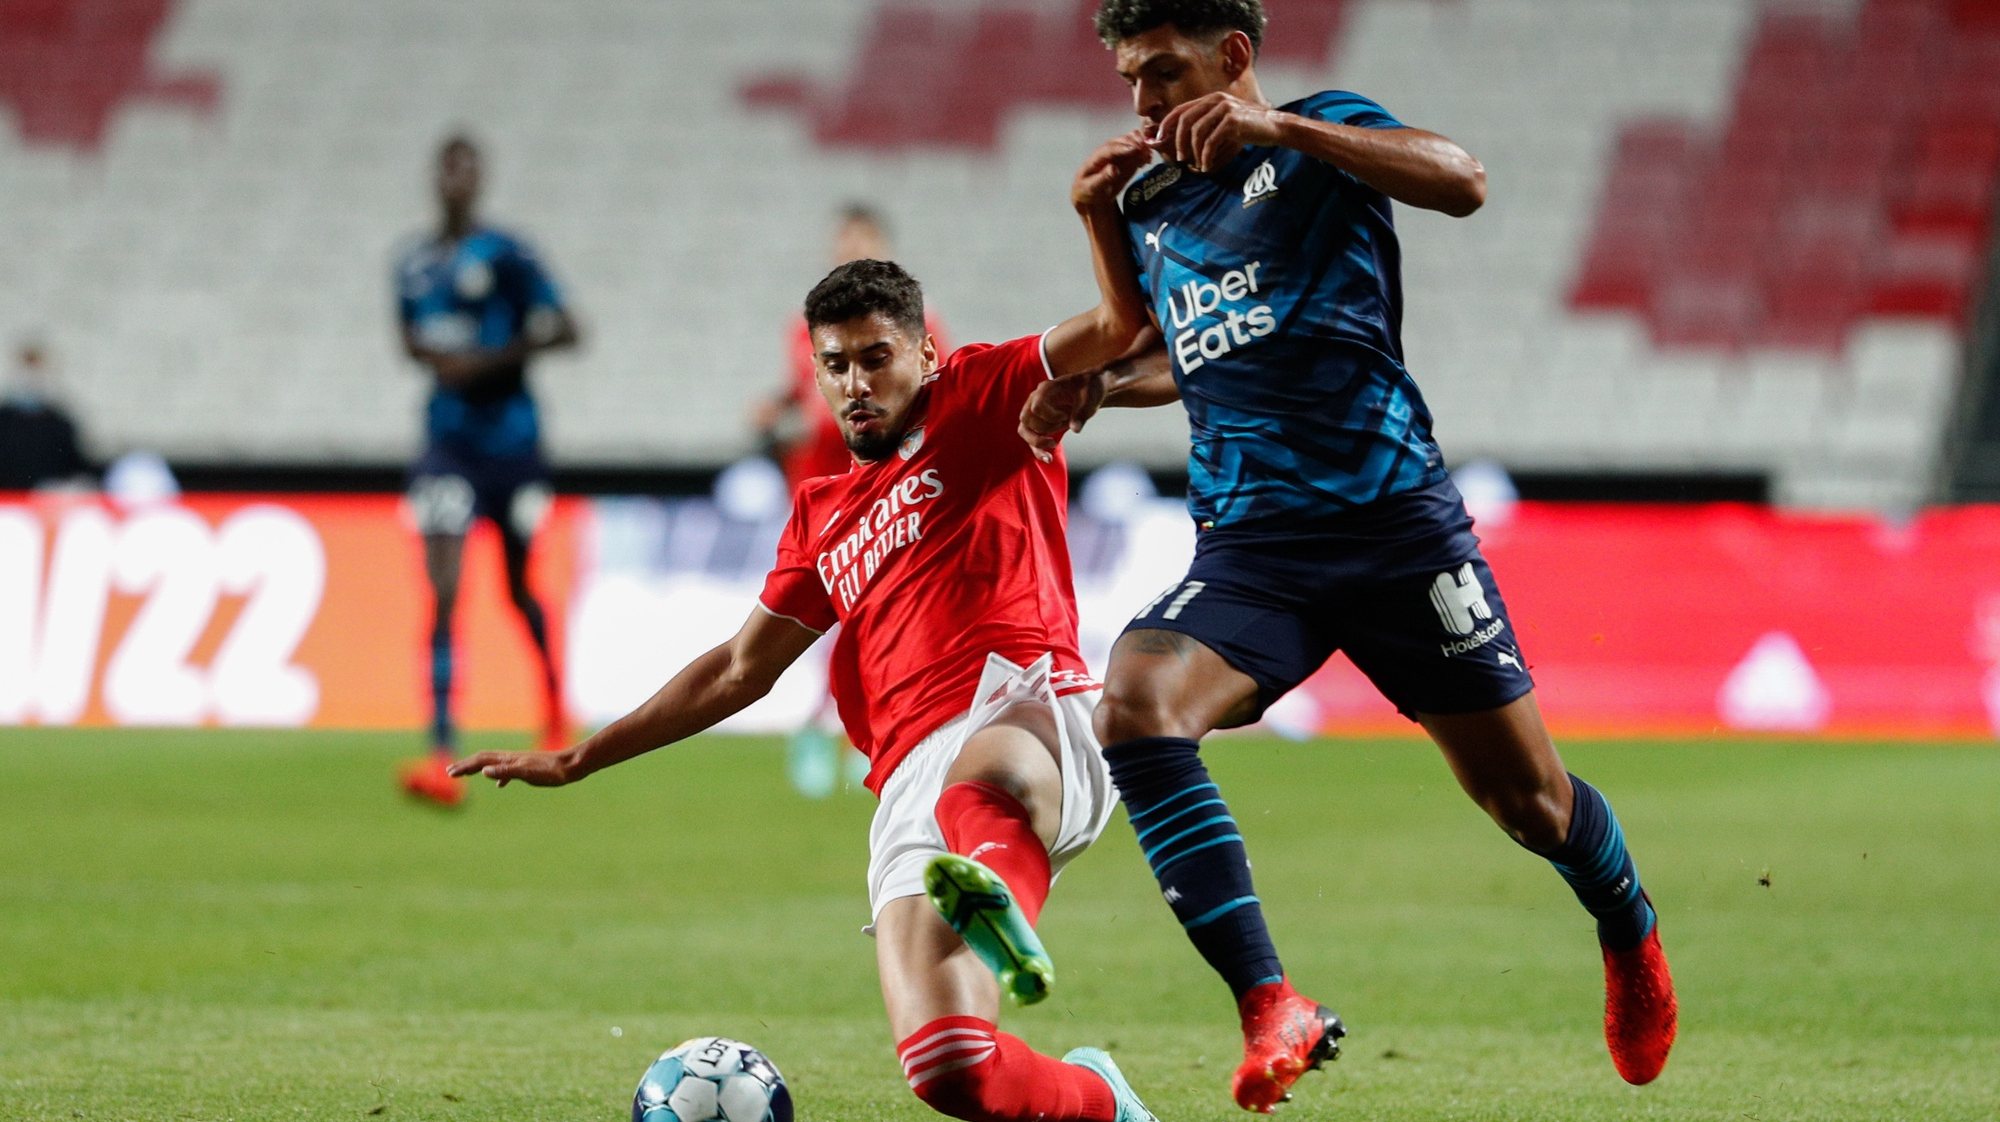 epa09365540 Benfica&#039;s player Gil Dias (L) in action against Olympique Marseille&#039;s player Luis Henrique (R), during the pre-season friendly test soccer match between Benfica and Olympique Marseille at Luz Stadium in Lisbon, Portugal, 25 July 2021.  EPA/ANTONIO COTRIM